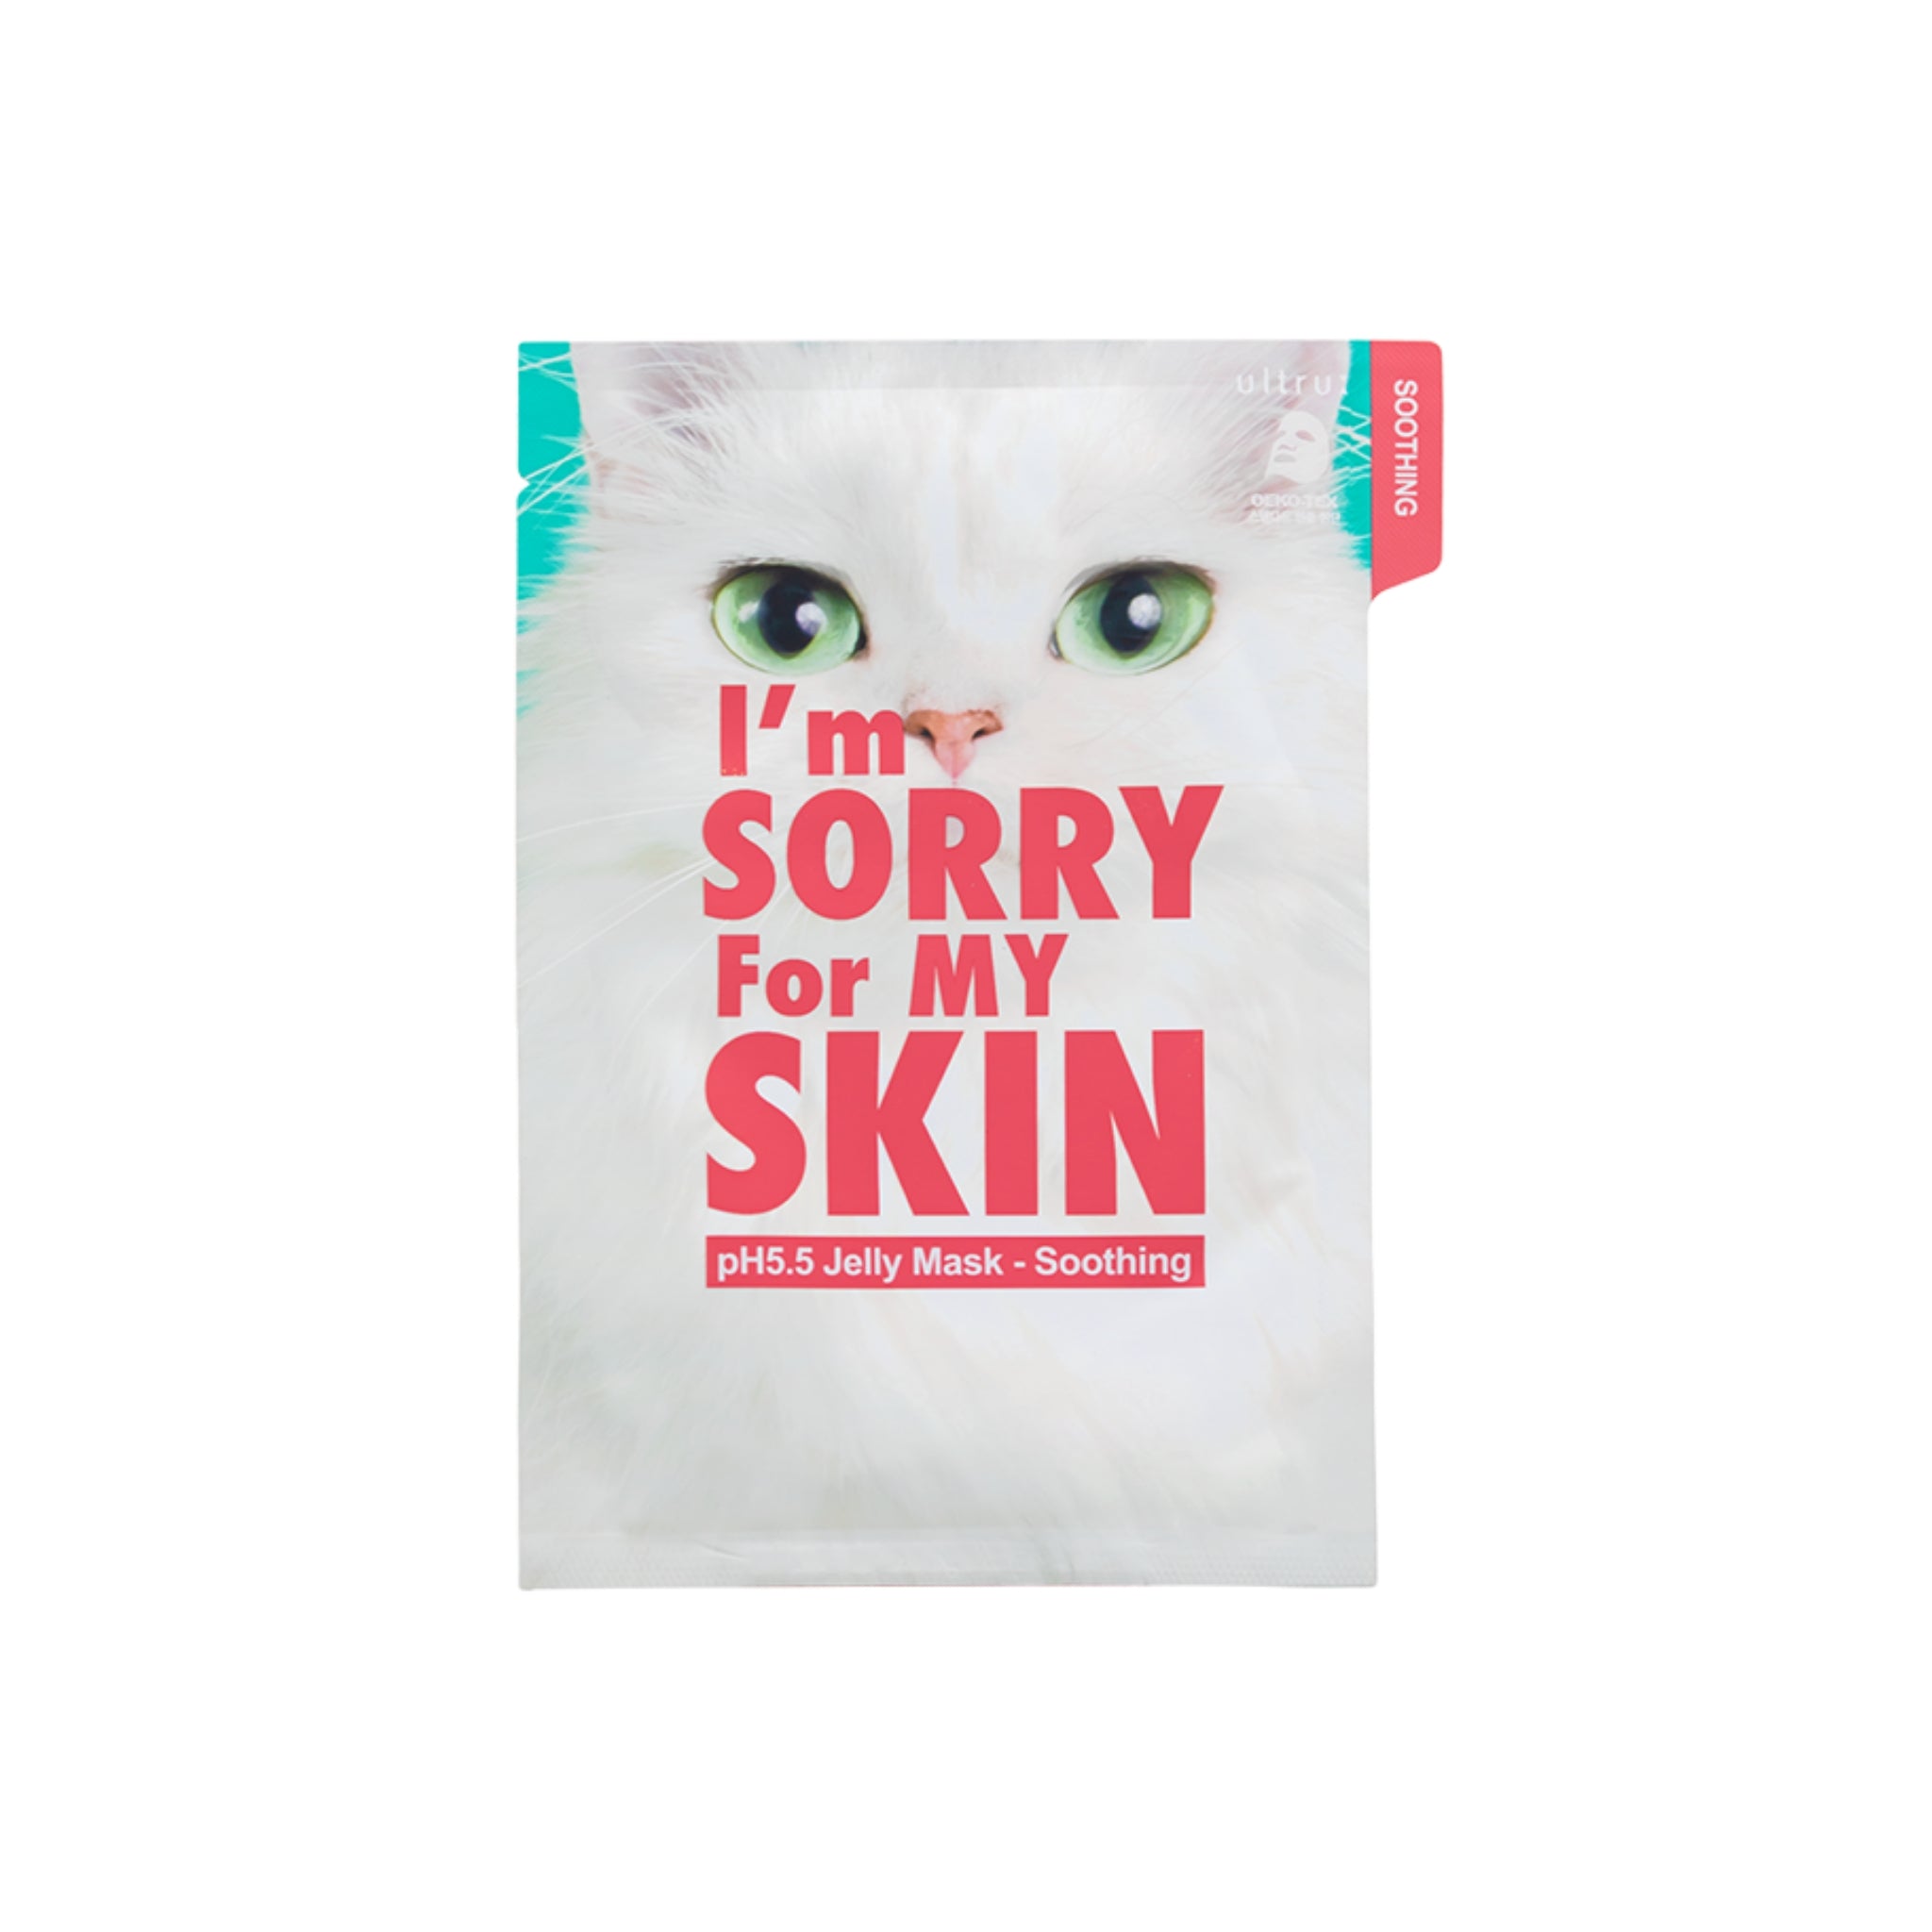 I'm Sorry for My Skin pH5.5 Jelly Mask - Soothing